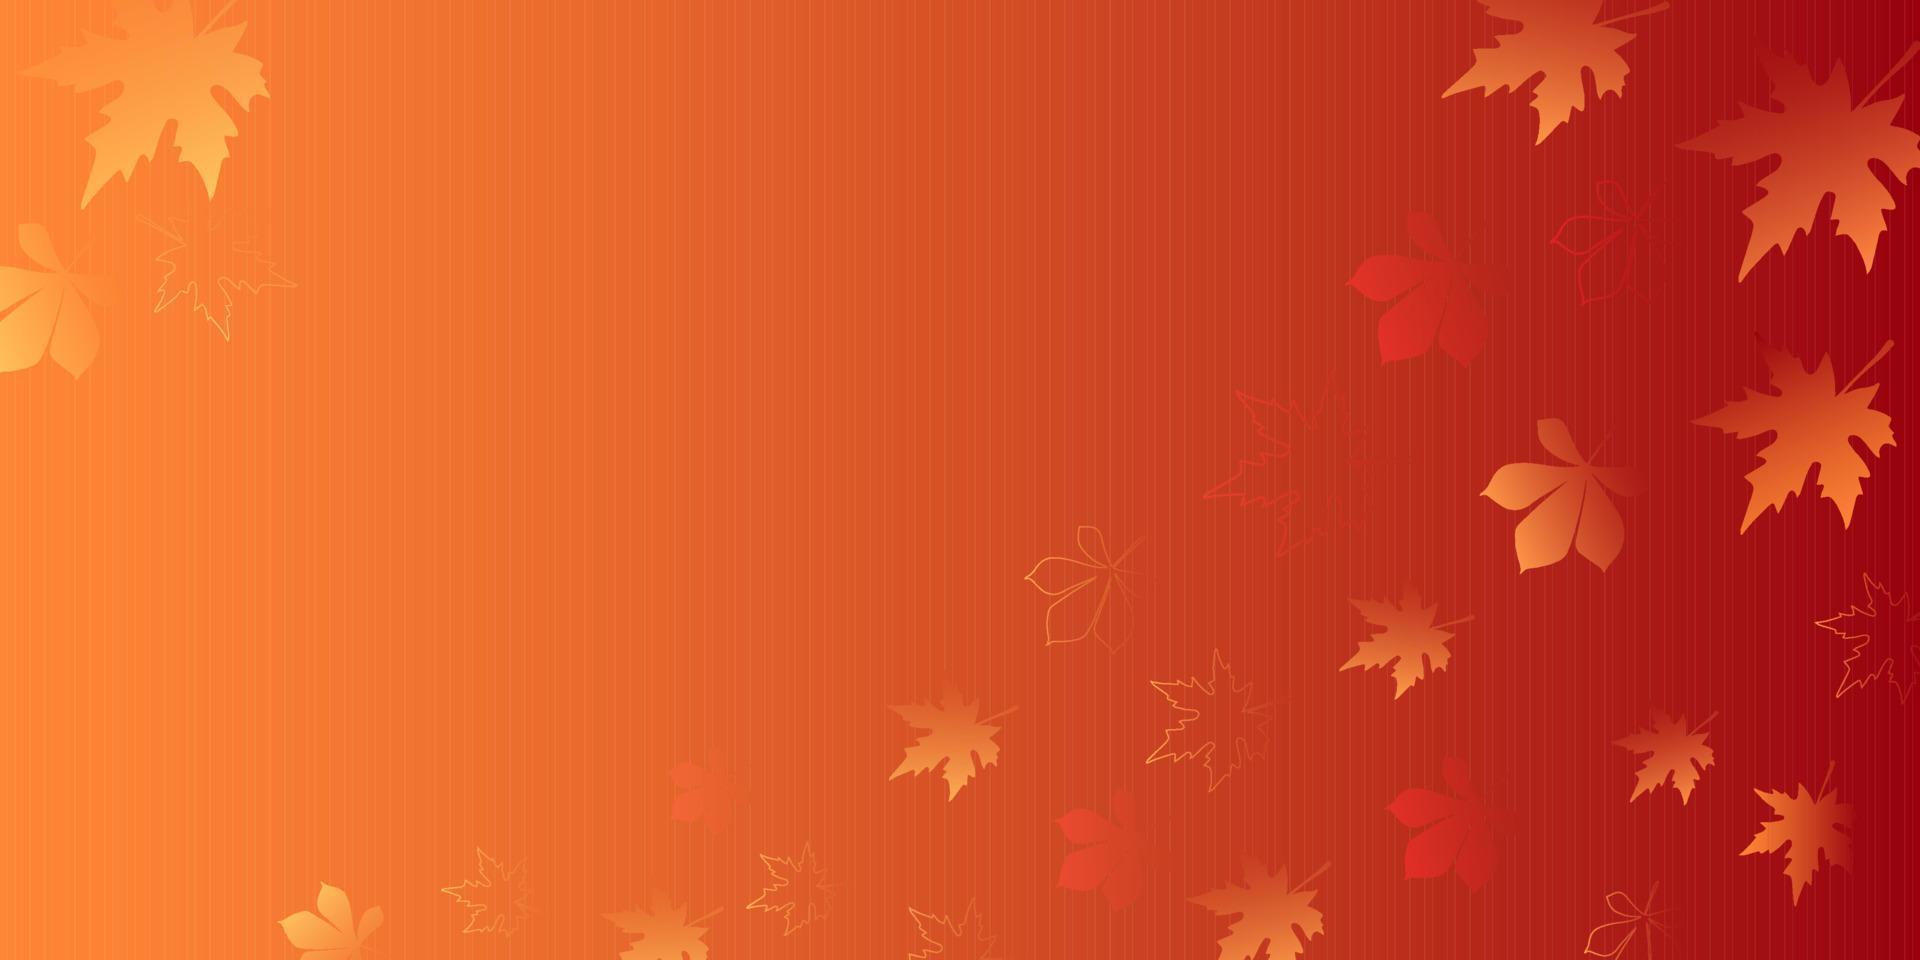 Colorful autumn mood background with autumn leaves, for postcards, banners, posters, web pages vector